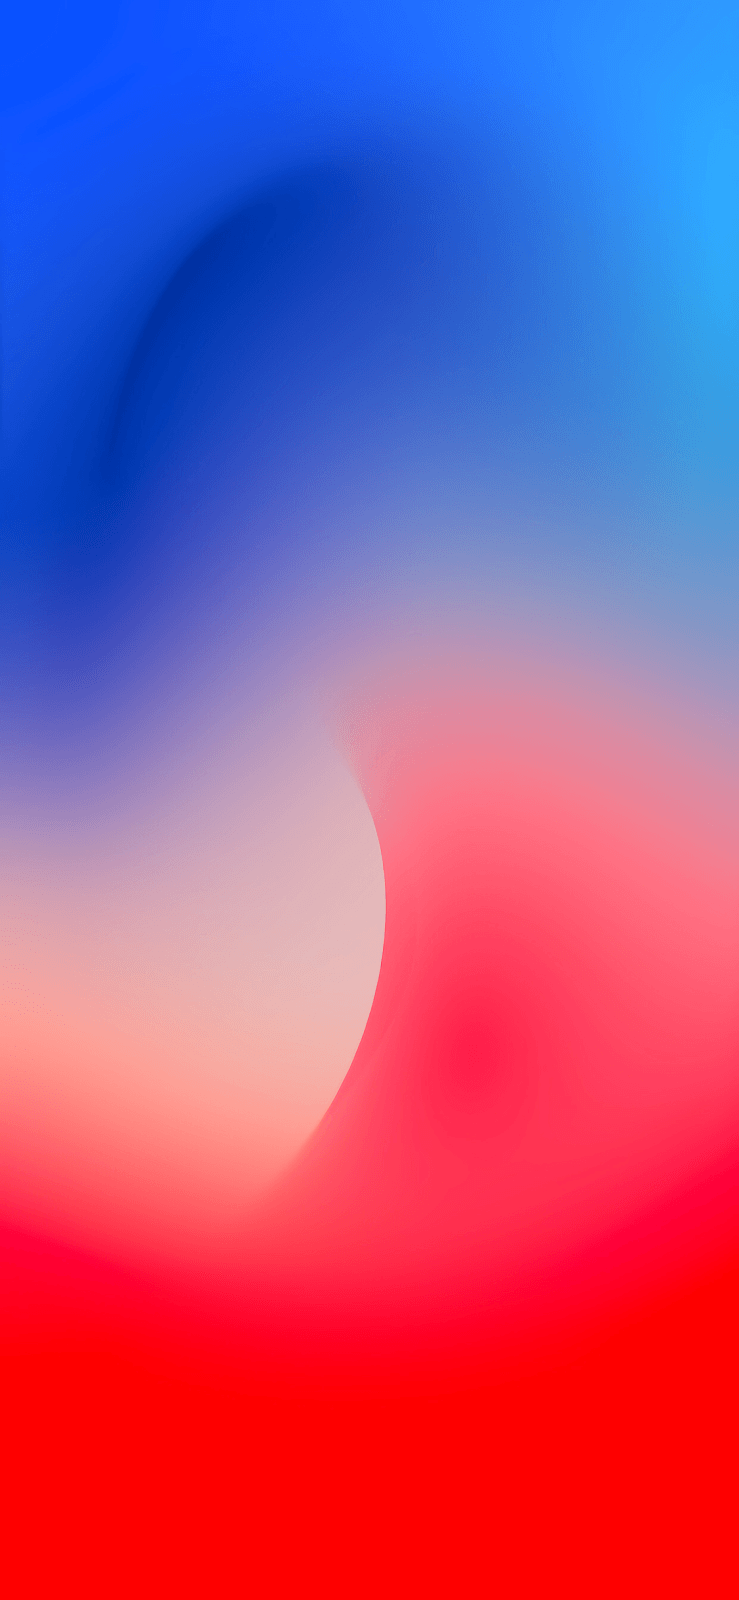 Fluid Blue and Red by AR72014. iPhone homescreen wallpaper